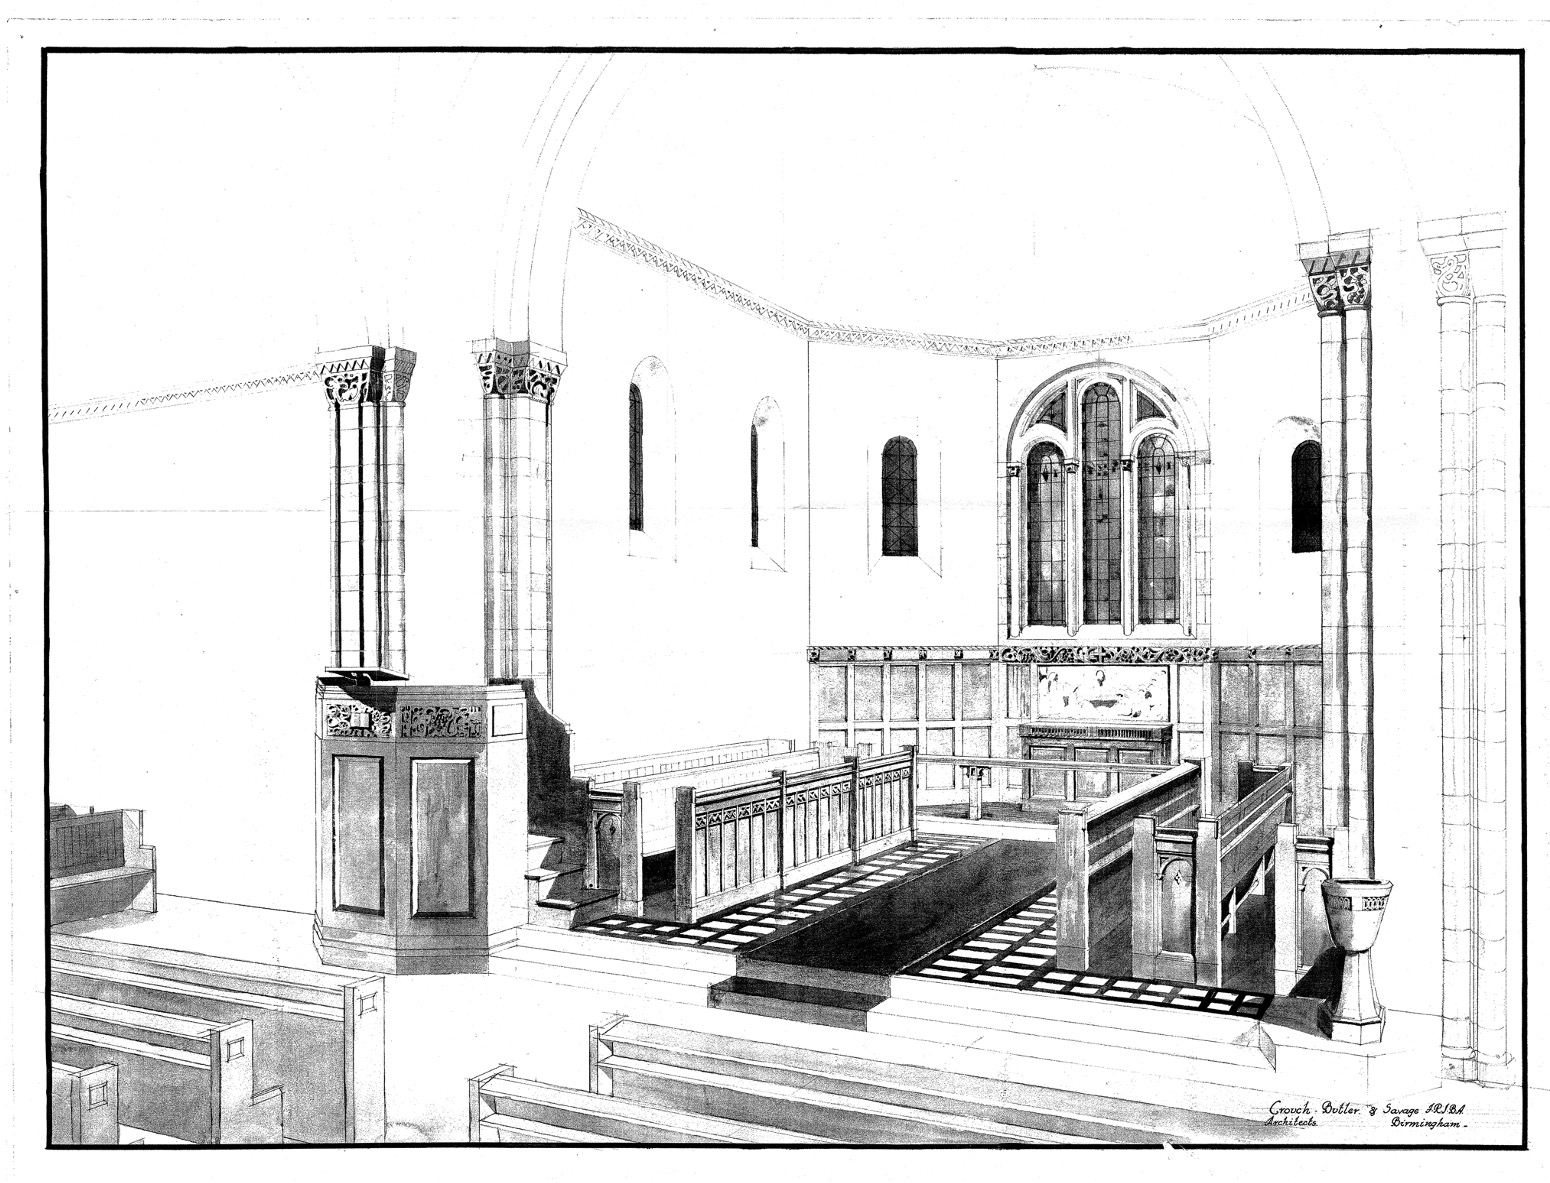 Drawing of the orgiginal chancel at New Road showing the old wooden pews, the existing pulpit, the existing choir pews and the font. The existing communion table can be seen at the back of the chancel with communion rail.